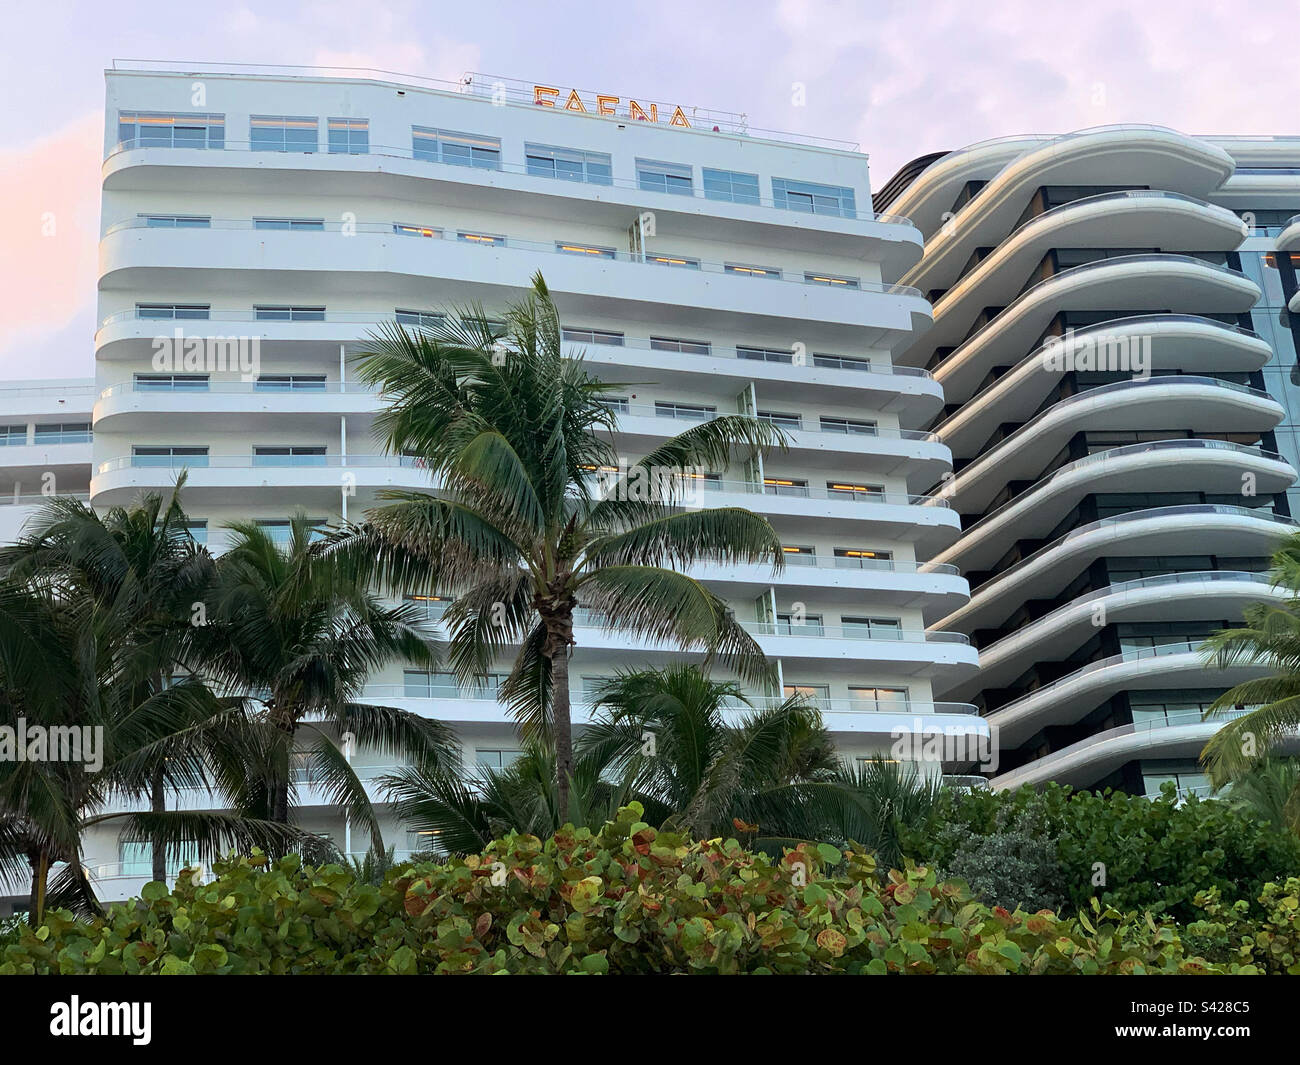 October, 2022, Sunset view of Faena Hotel Miami Beach from the beach, Miami Beach, Florida, United States Stock Photo